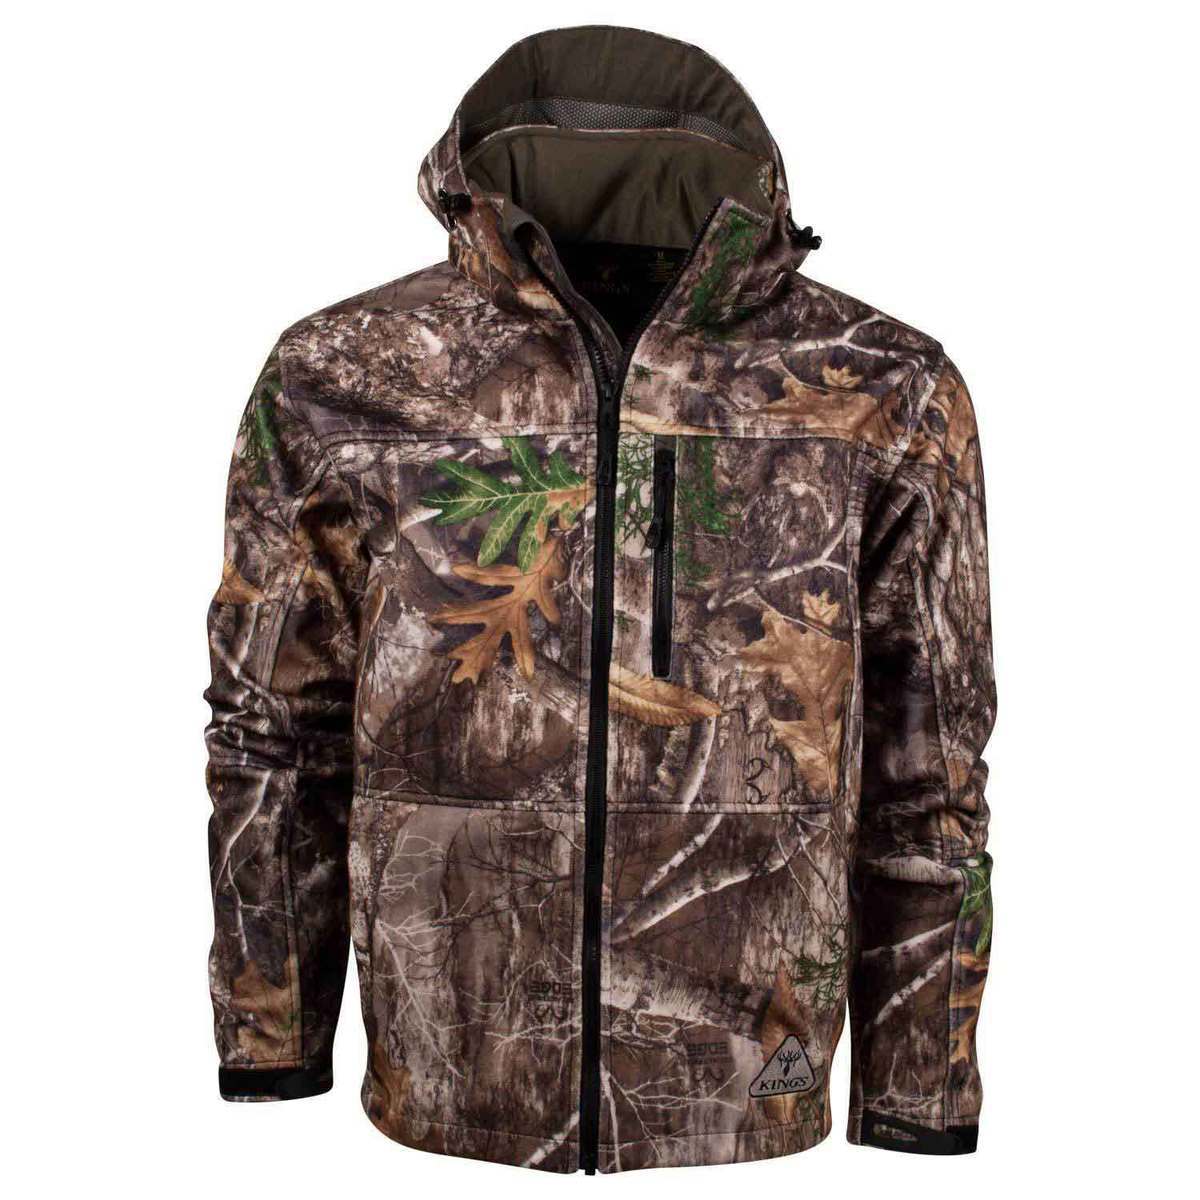 Camo Tree Insulated Jacket For Men, 56% OFF